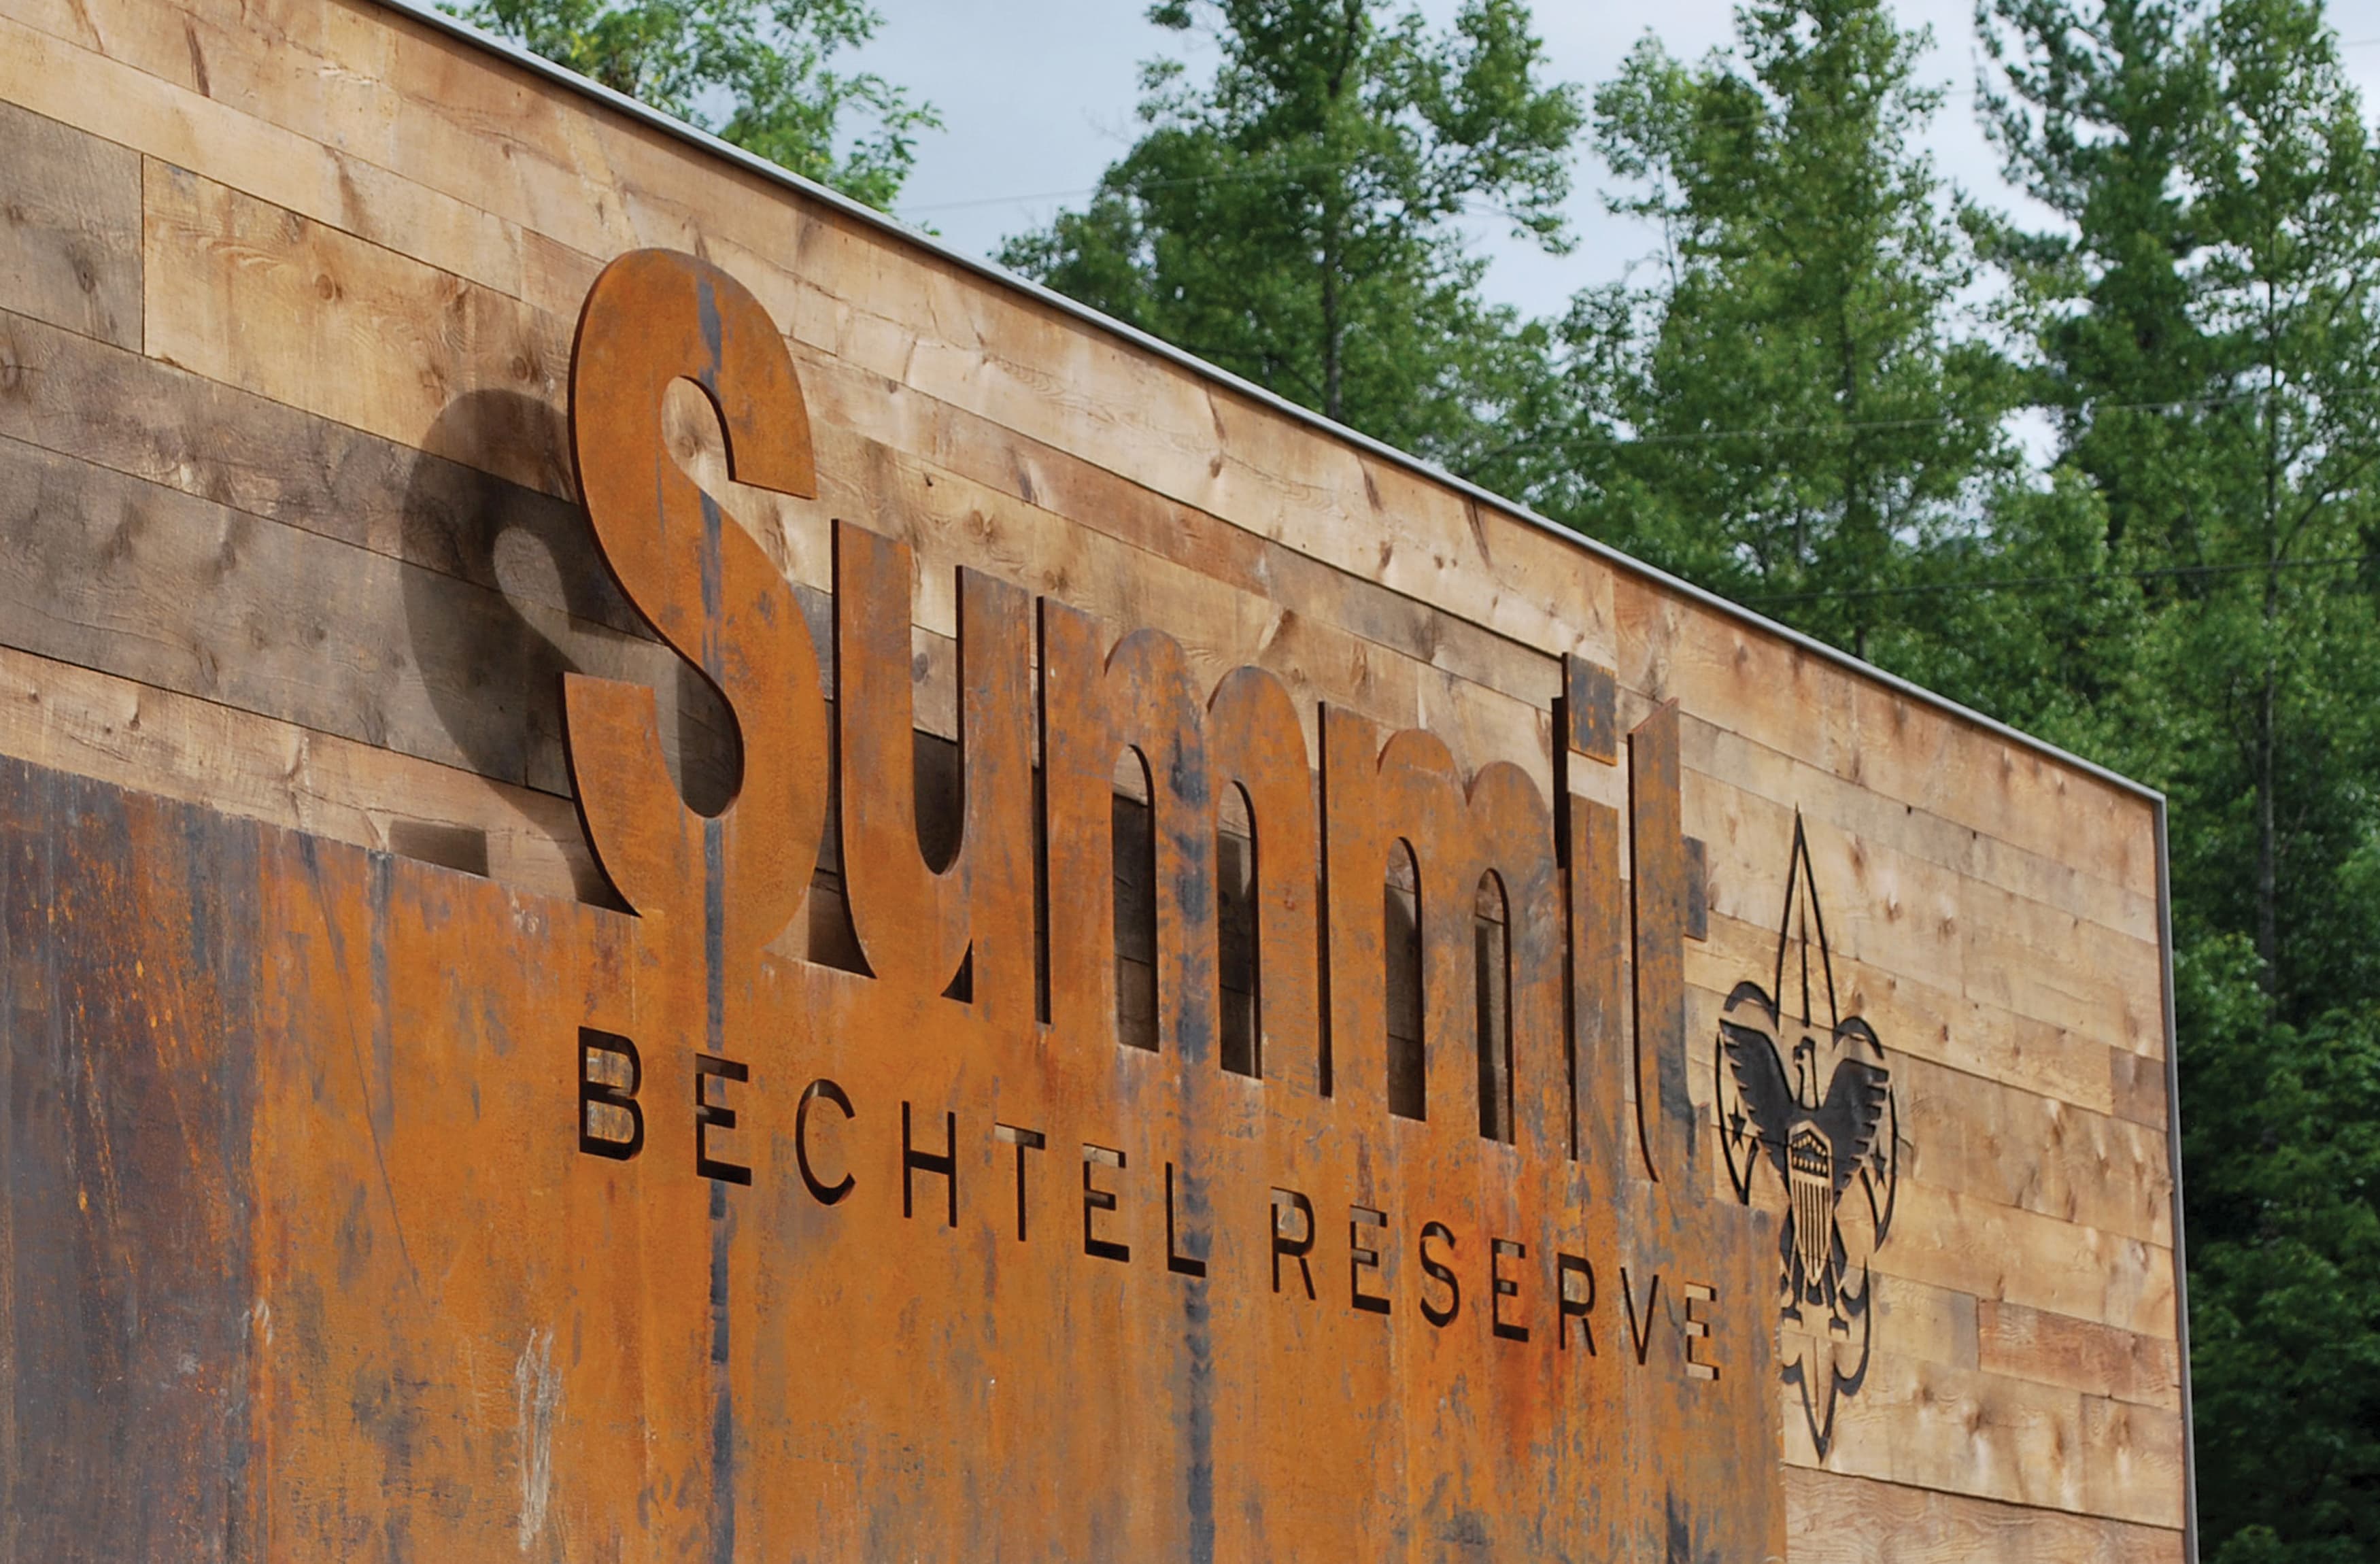 Boy Scouts of America, The Summit Bechtel Reserve corten project identity monument